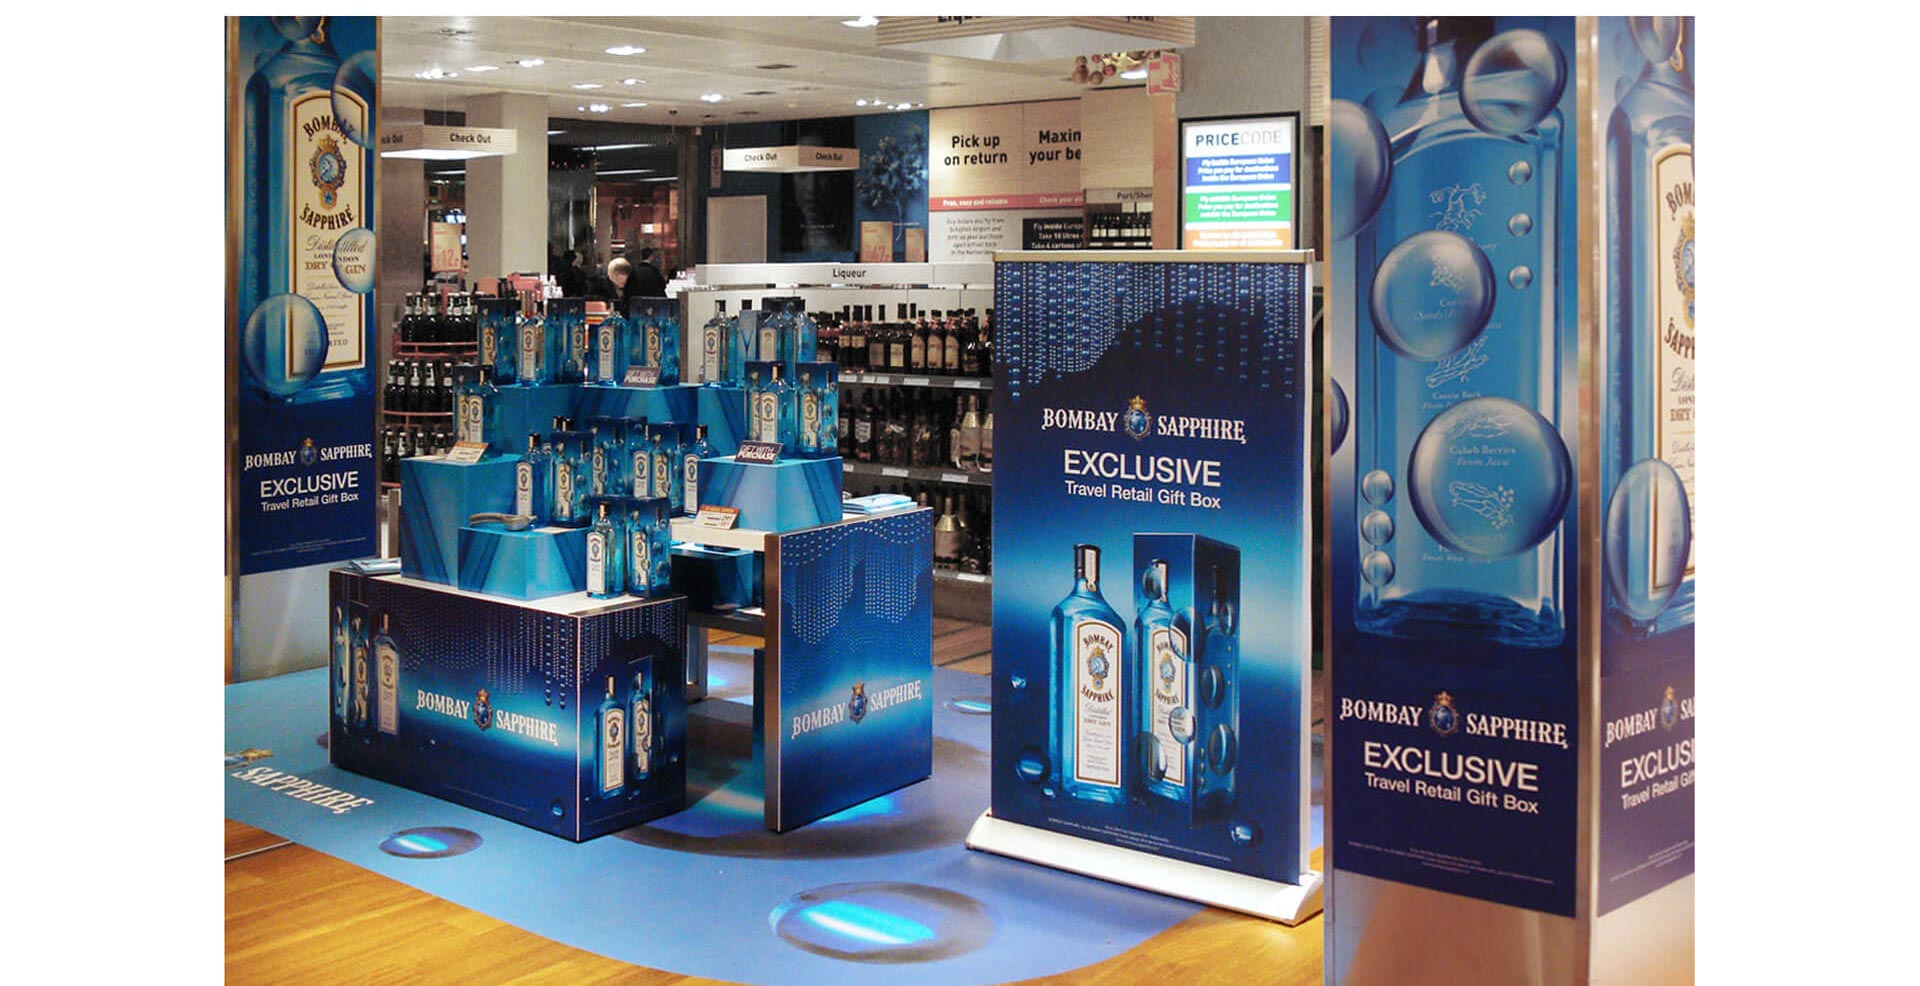  Bombay Sapphire Reign merchandising display branding and promotion campaigns travel retail in airports